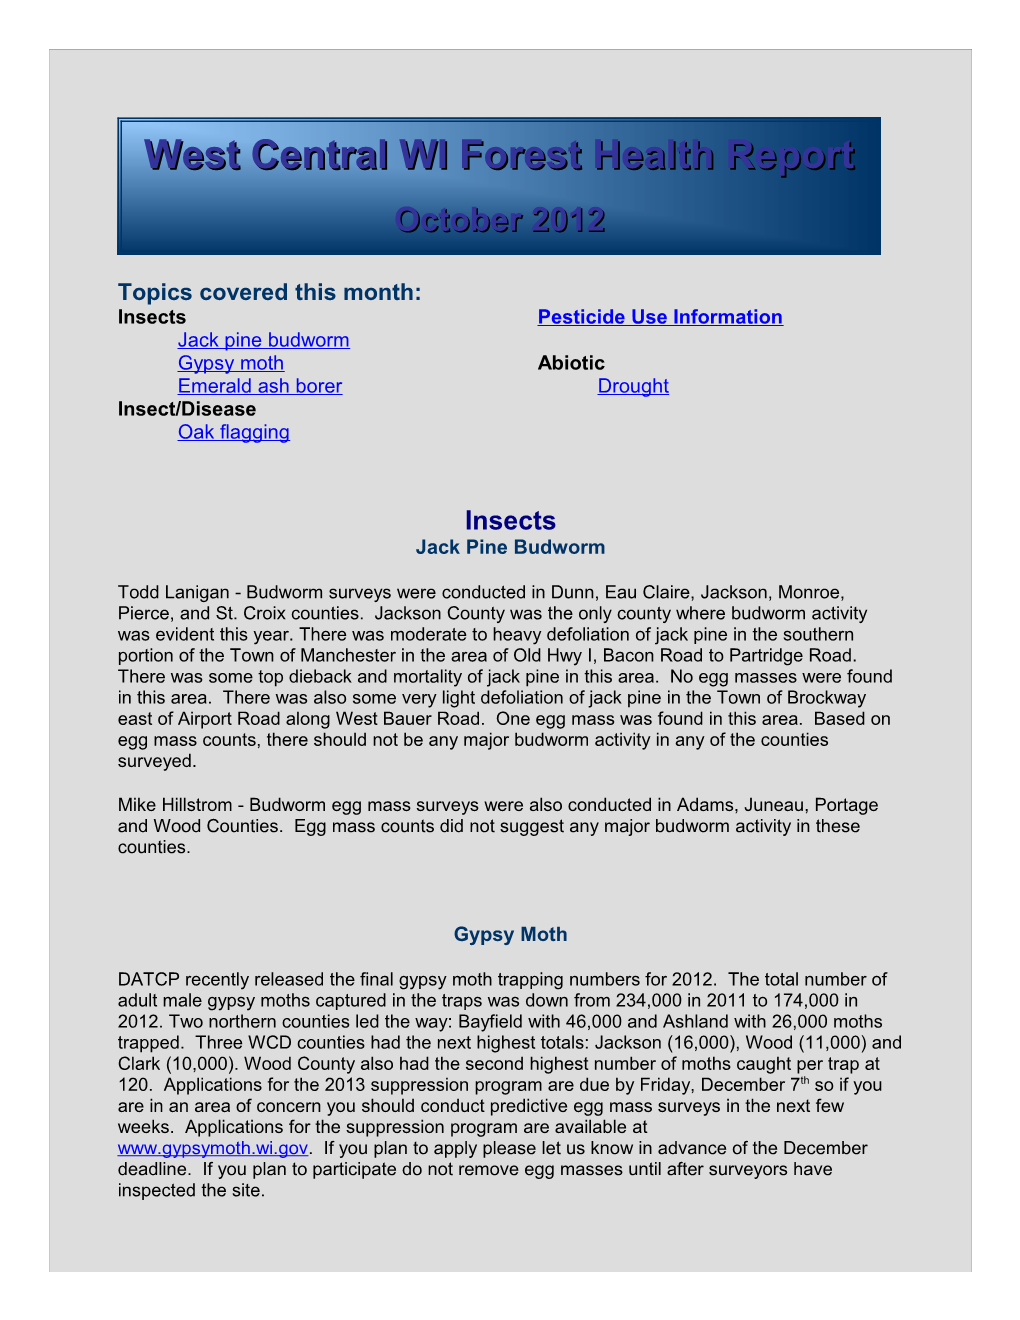 WCR Forest Health Report